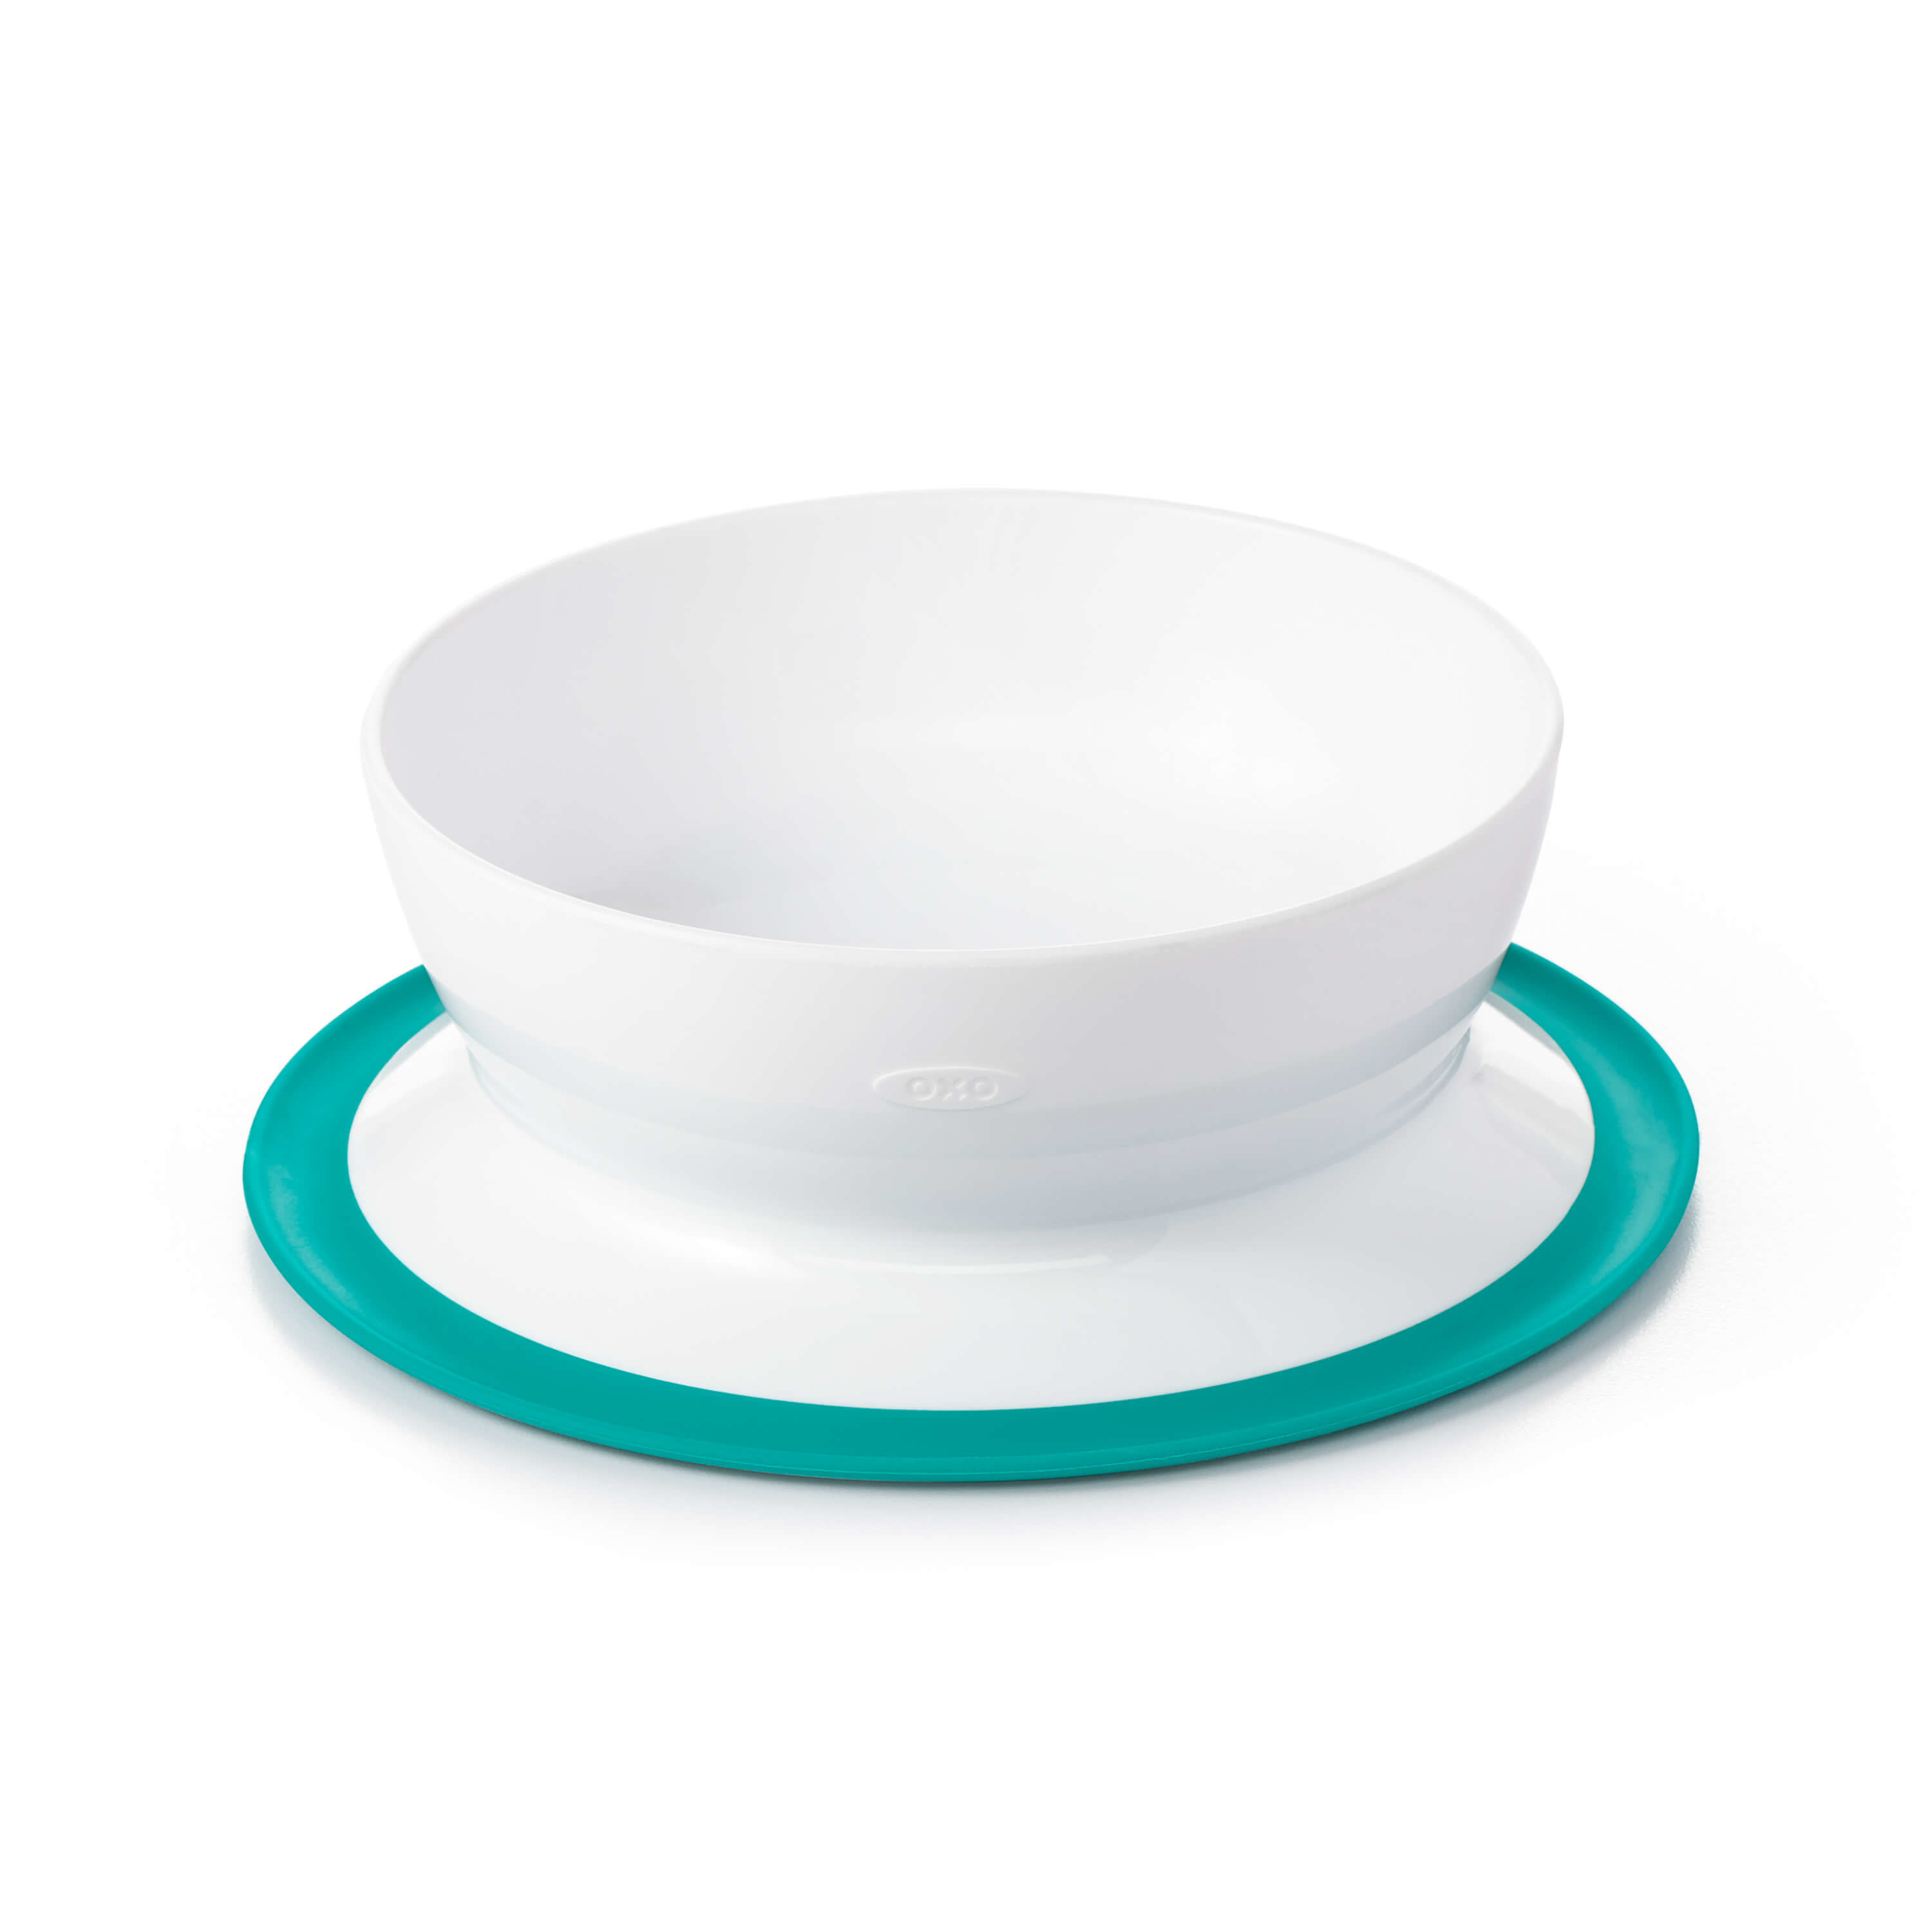 https://www.momjunction.com/wp-content/uploads/product-images/oxo-tot-stick--stay-suction-bowl_afl611.jpg